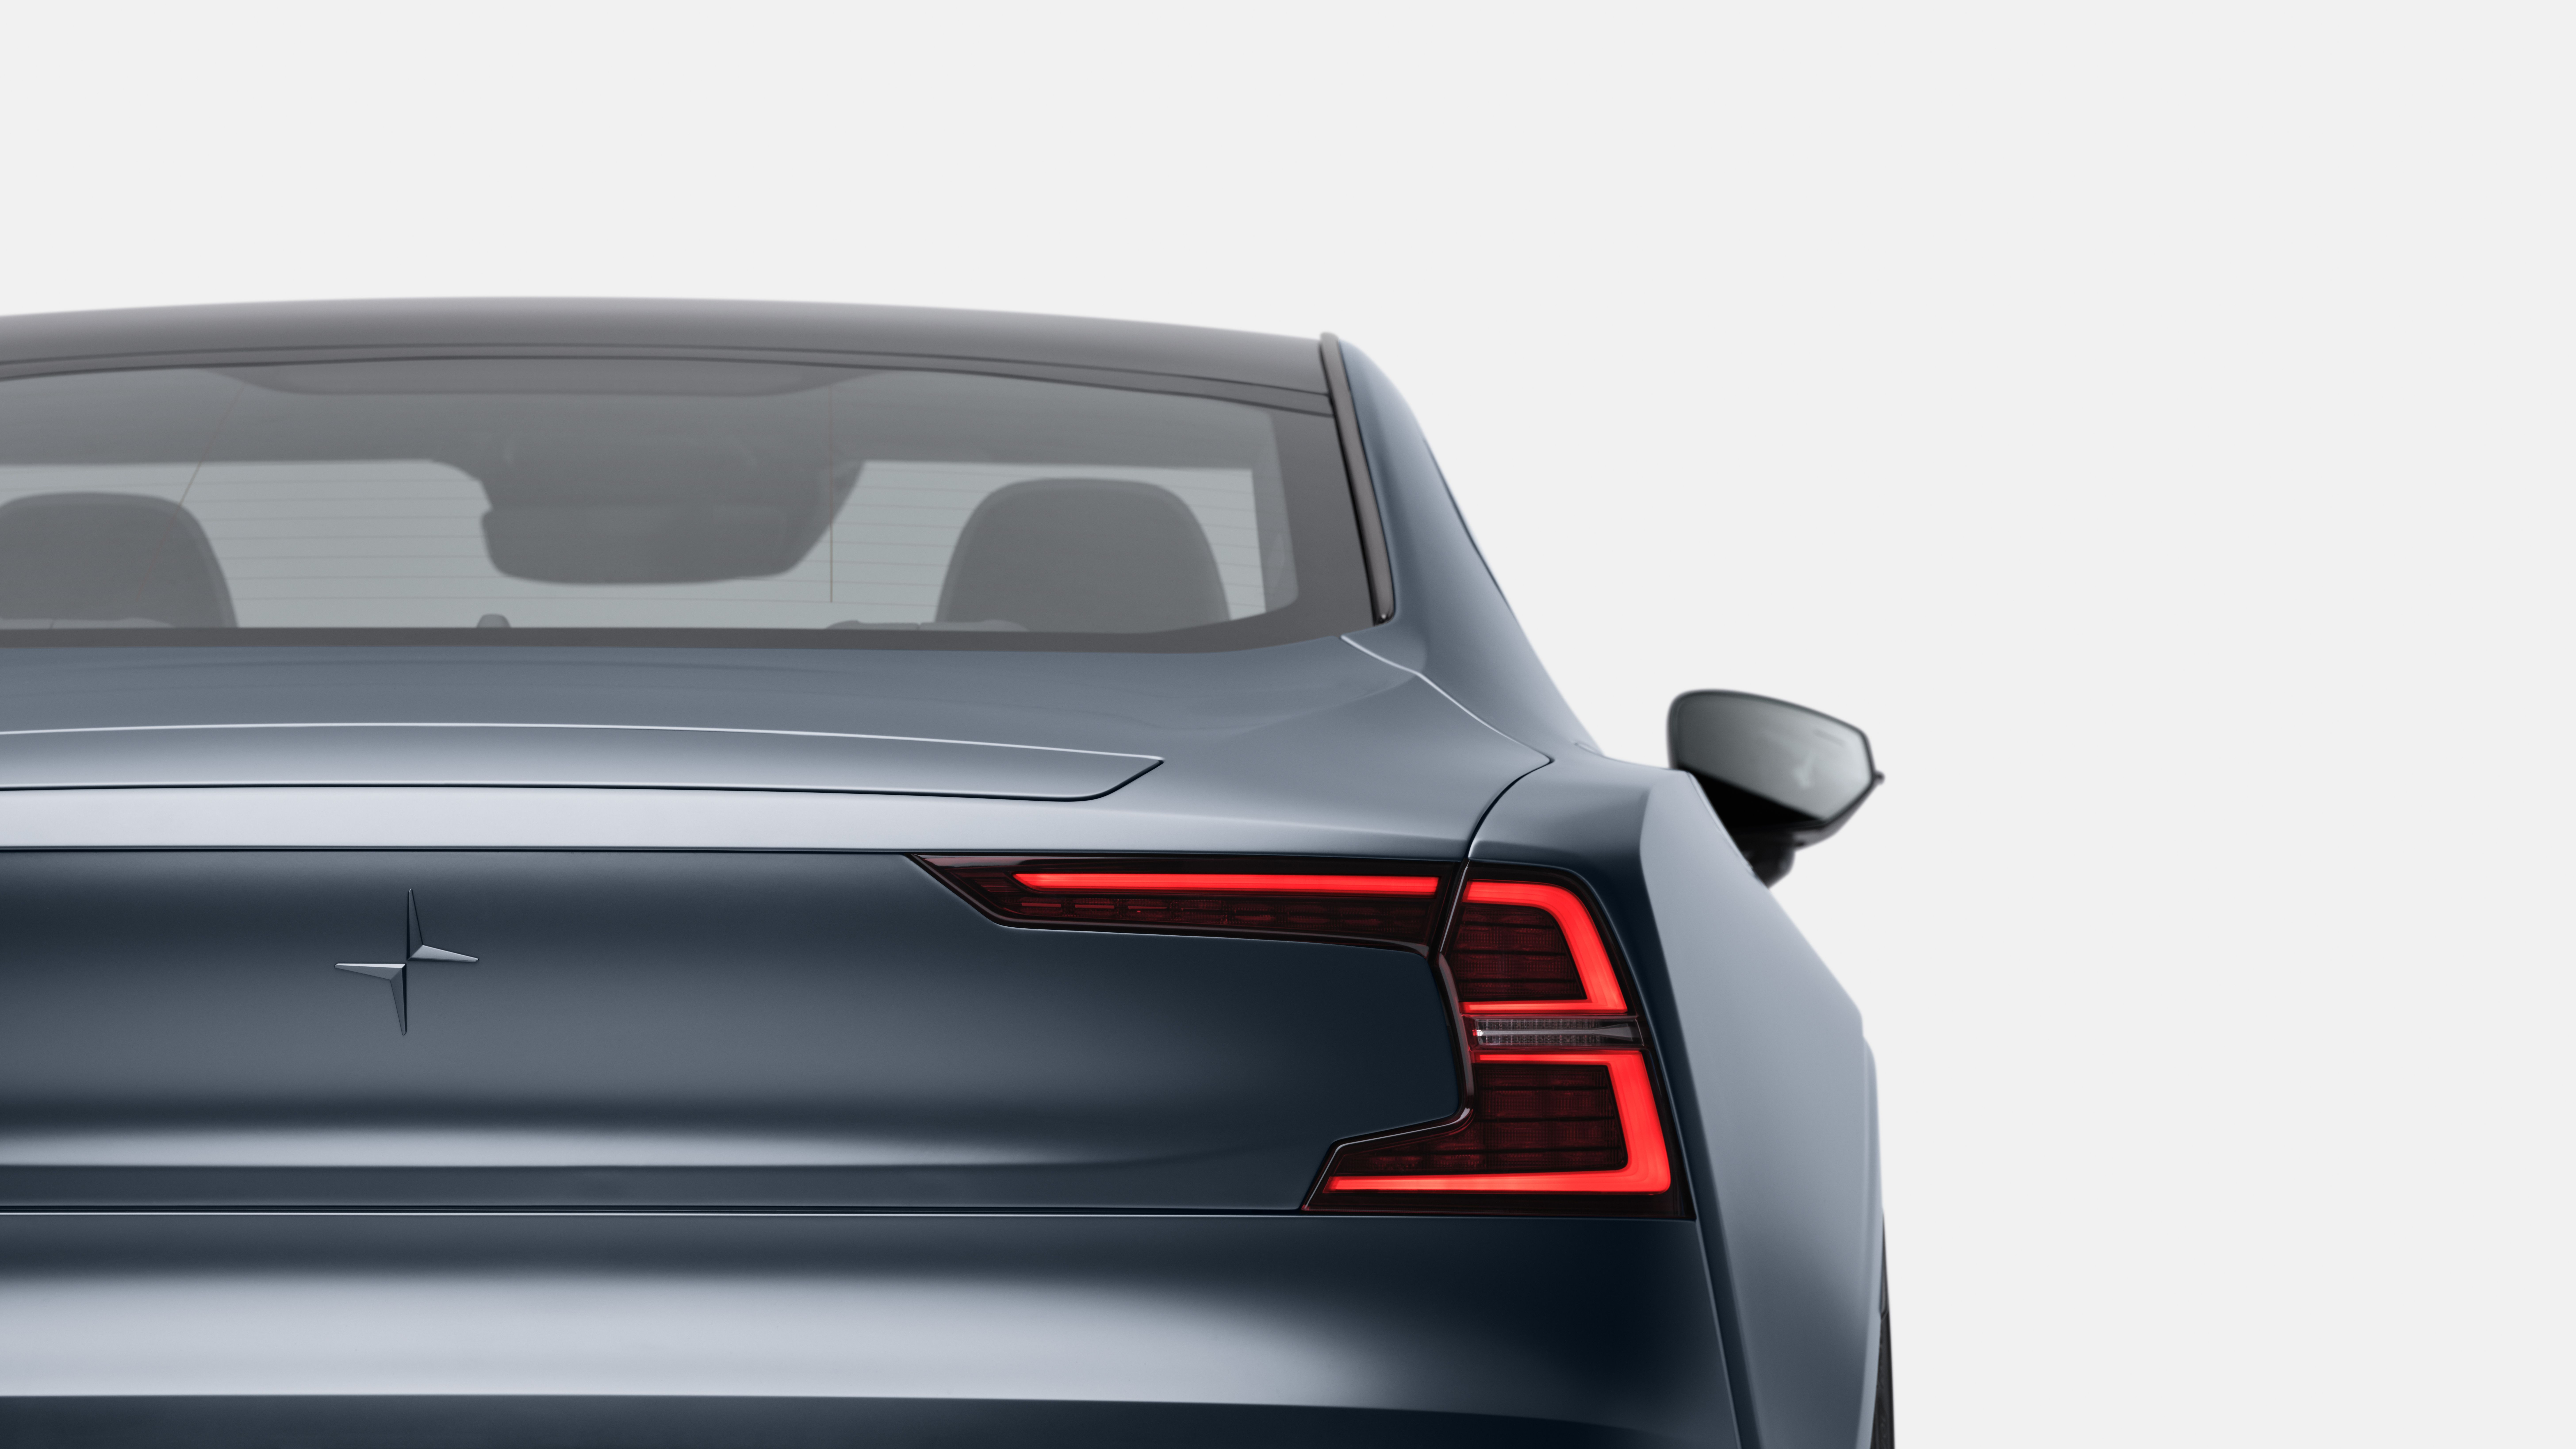 Active rear spoiler in the retracted position on a Polestar 1